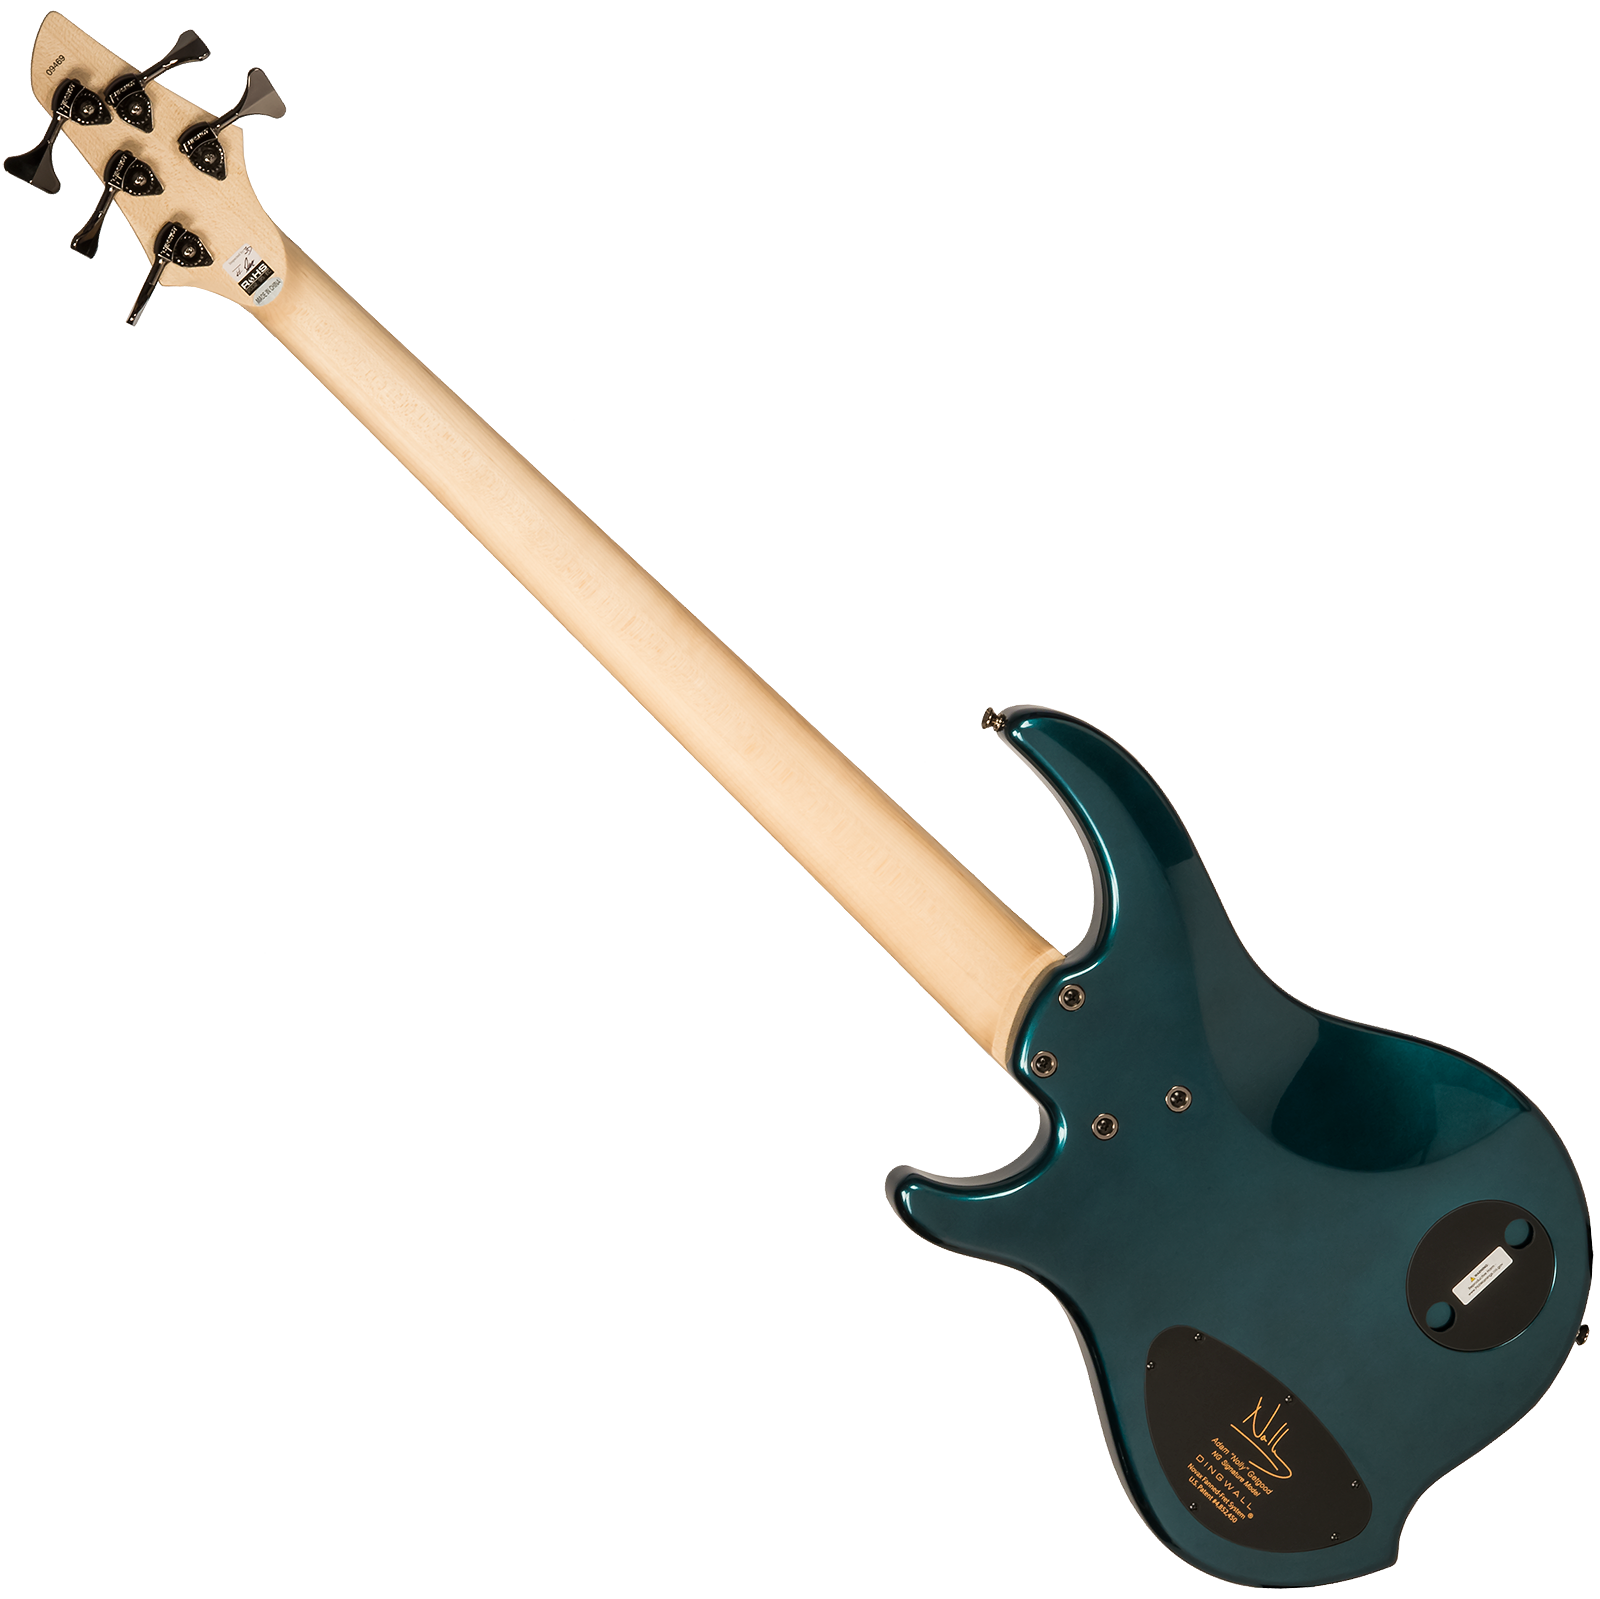 Dingwall Adam Nolly Getgood Ng3 5c Signature 3pu Active Mn - Black Forrest Green - Solid body electric bass - Variation 1